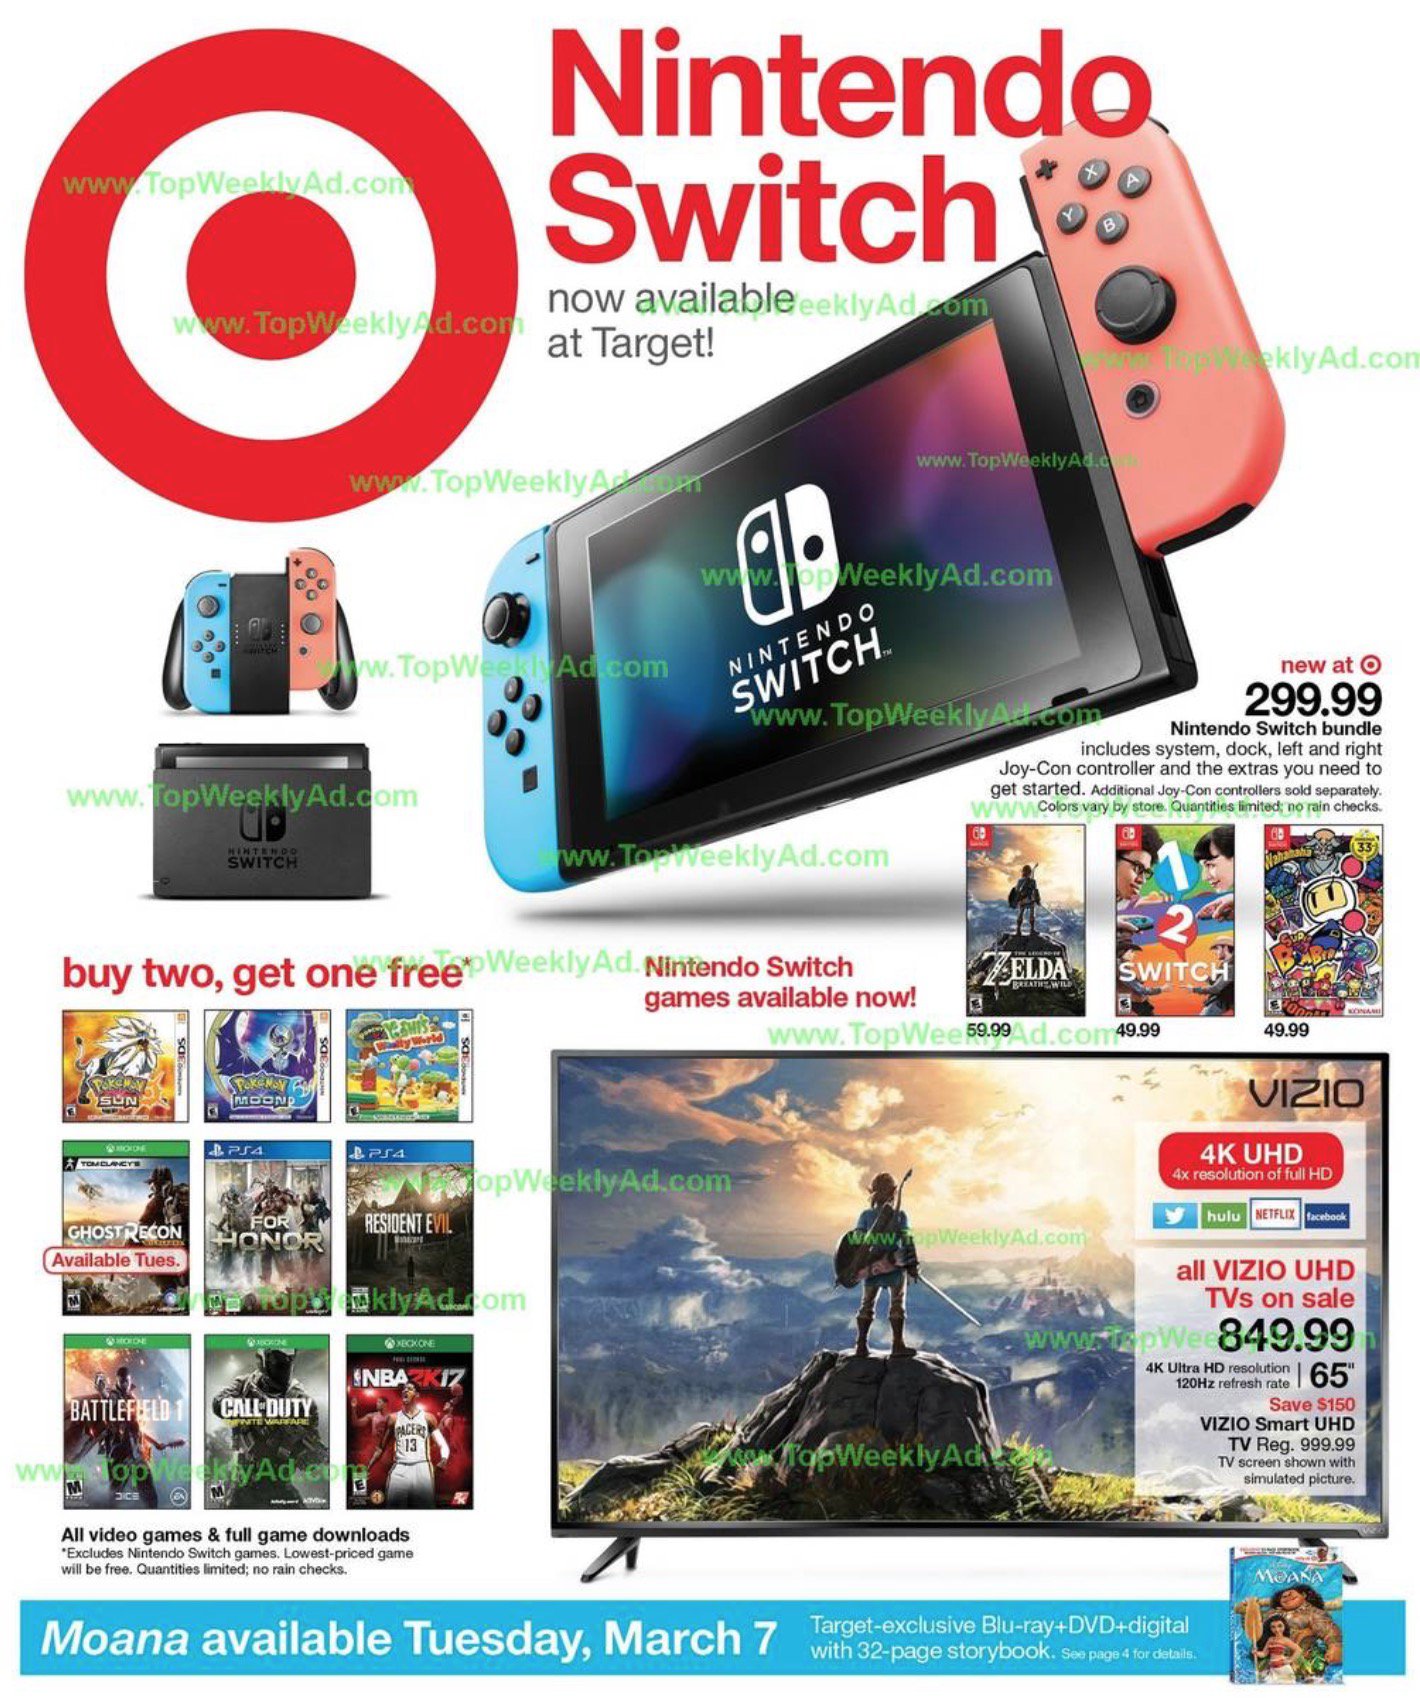 switch games buy 2 get 1 free